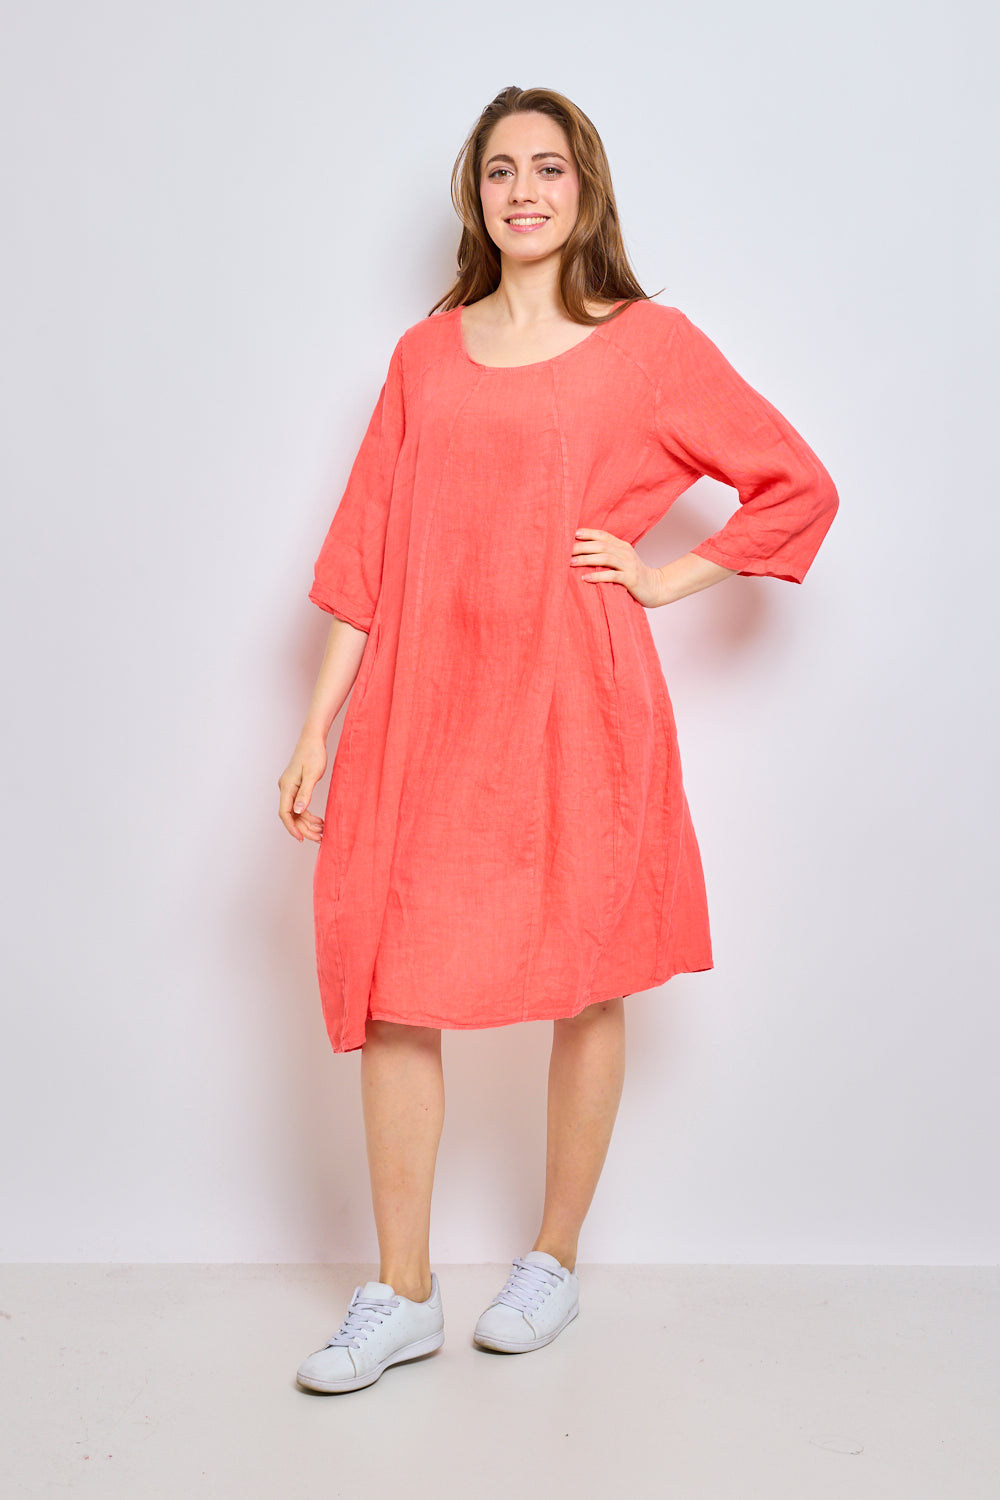 Linen dress with rounded collar